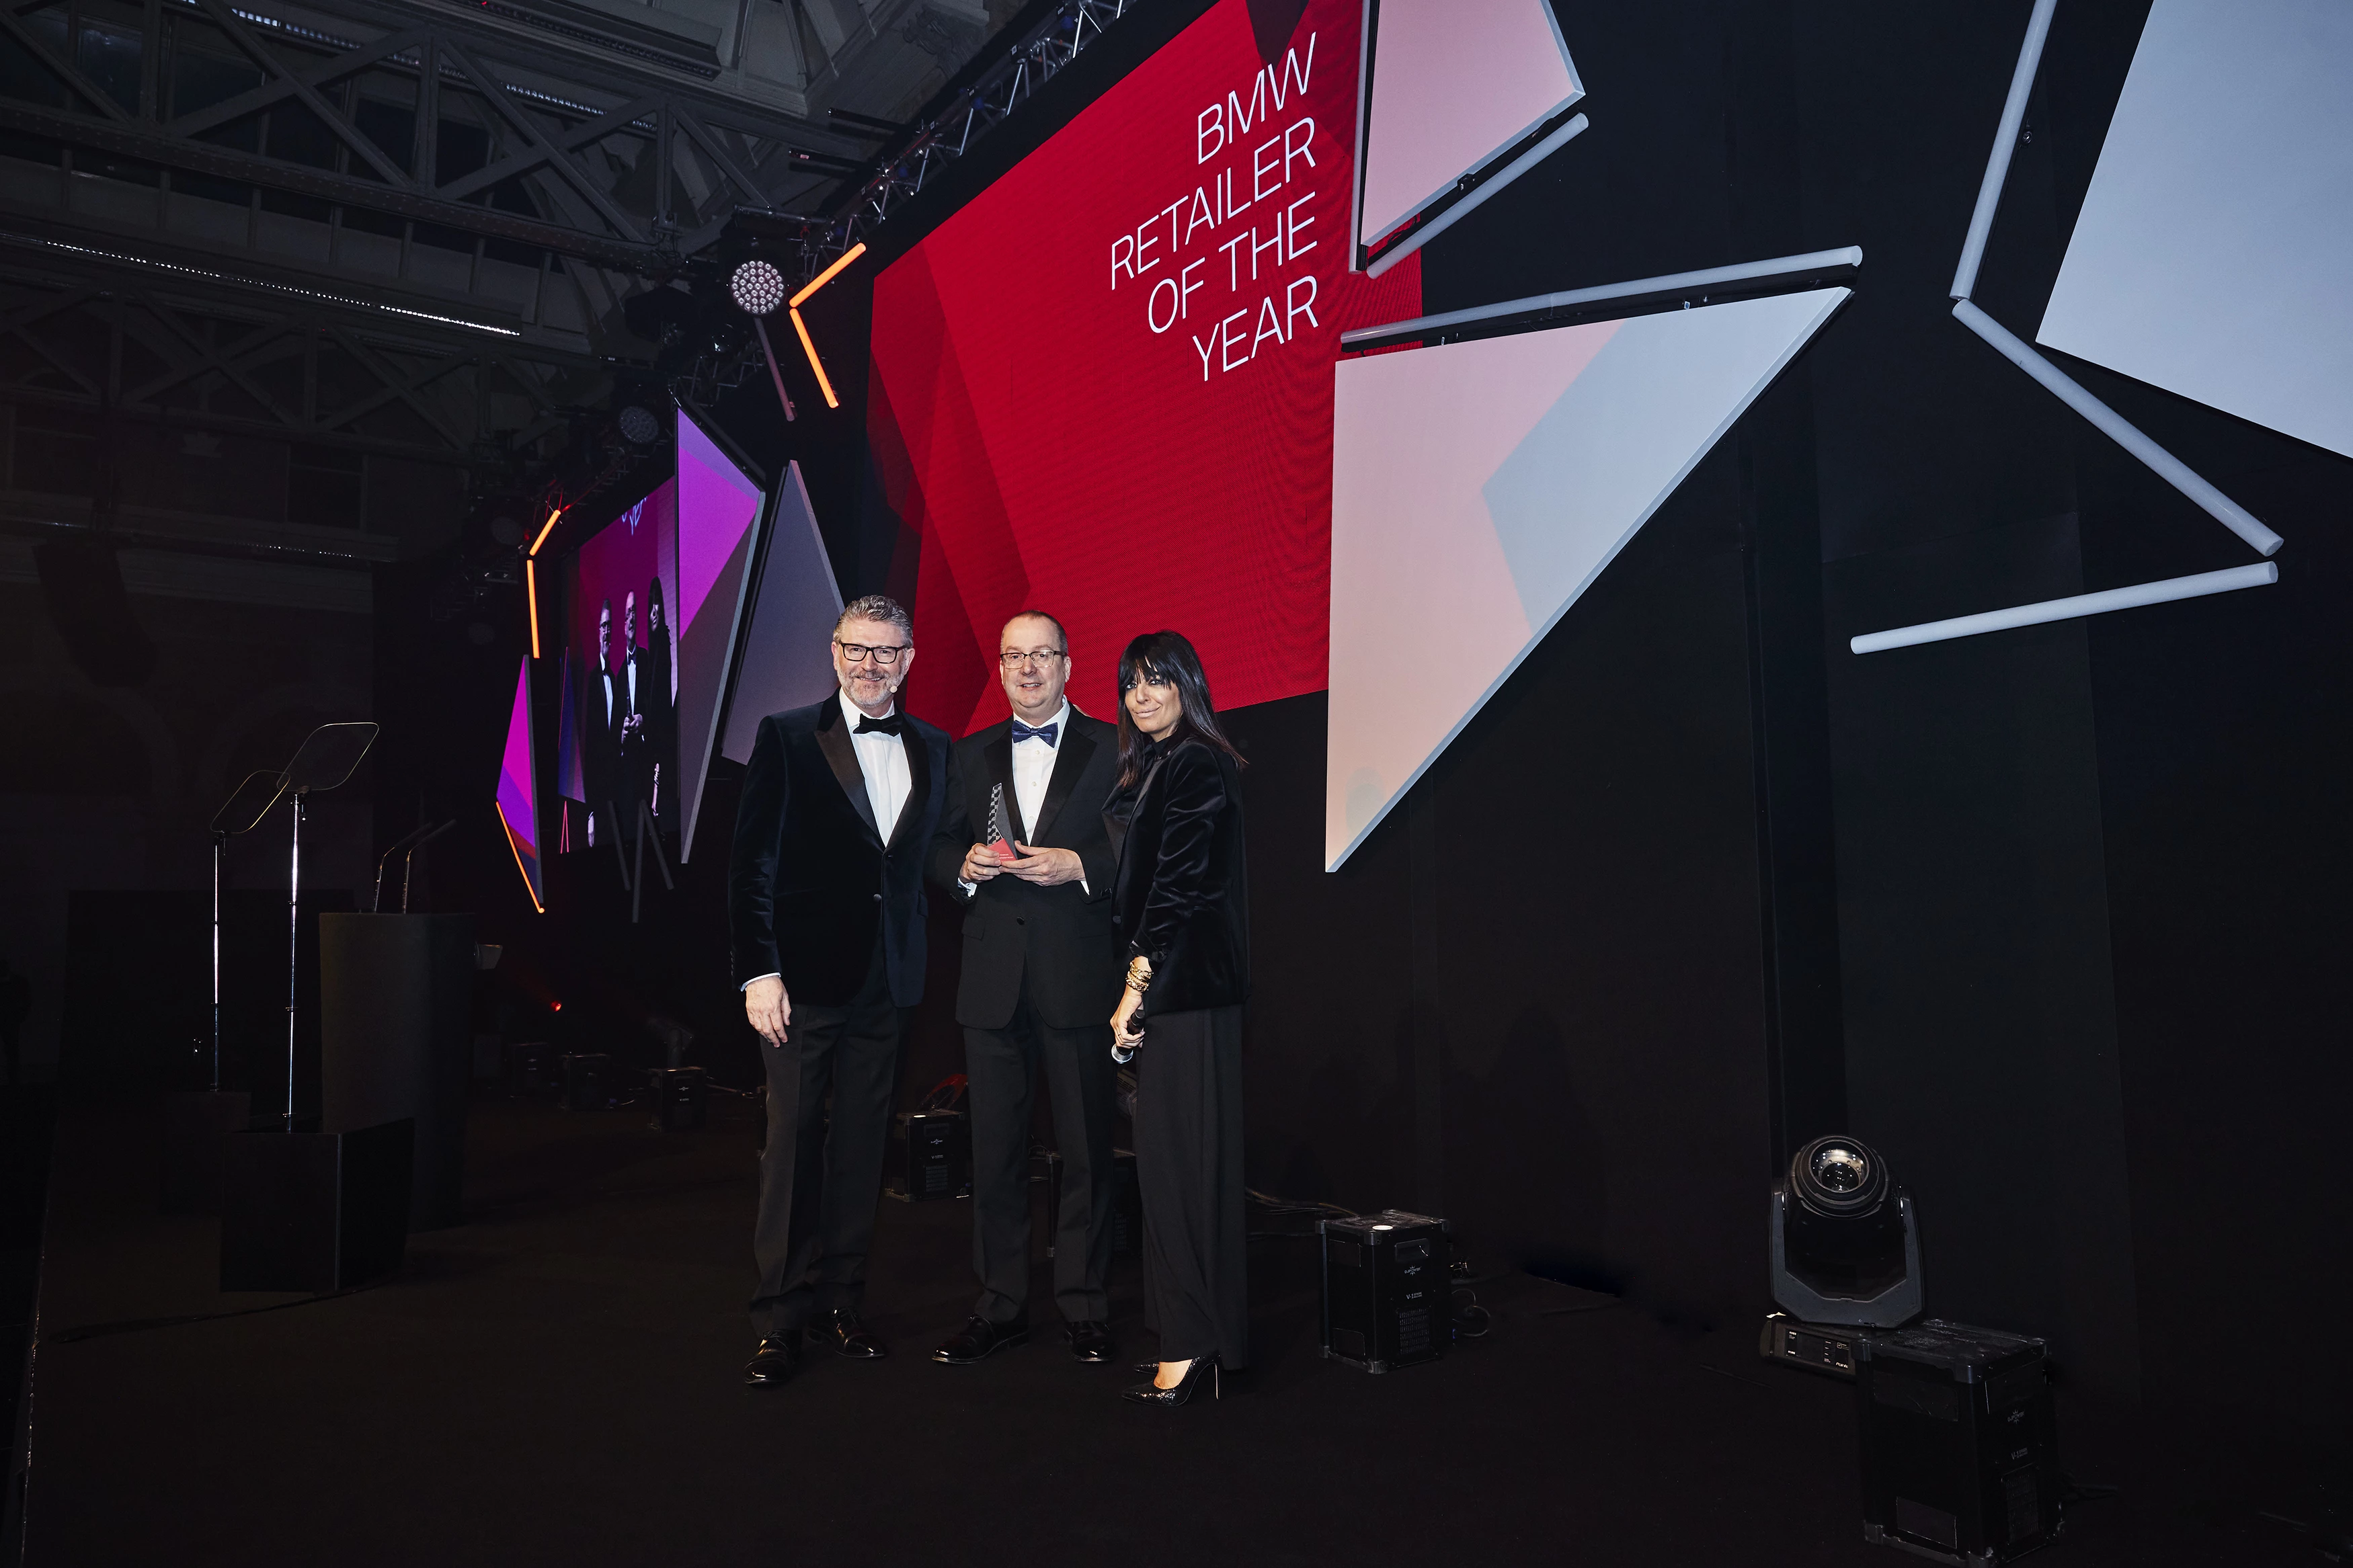 David Lewins, Lloyd Newcastle Head of Business pictured with presenter Claudia Winkleman and BMW Group UK Managing Director Graeme Grieve